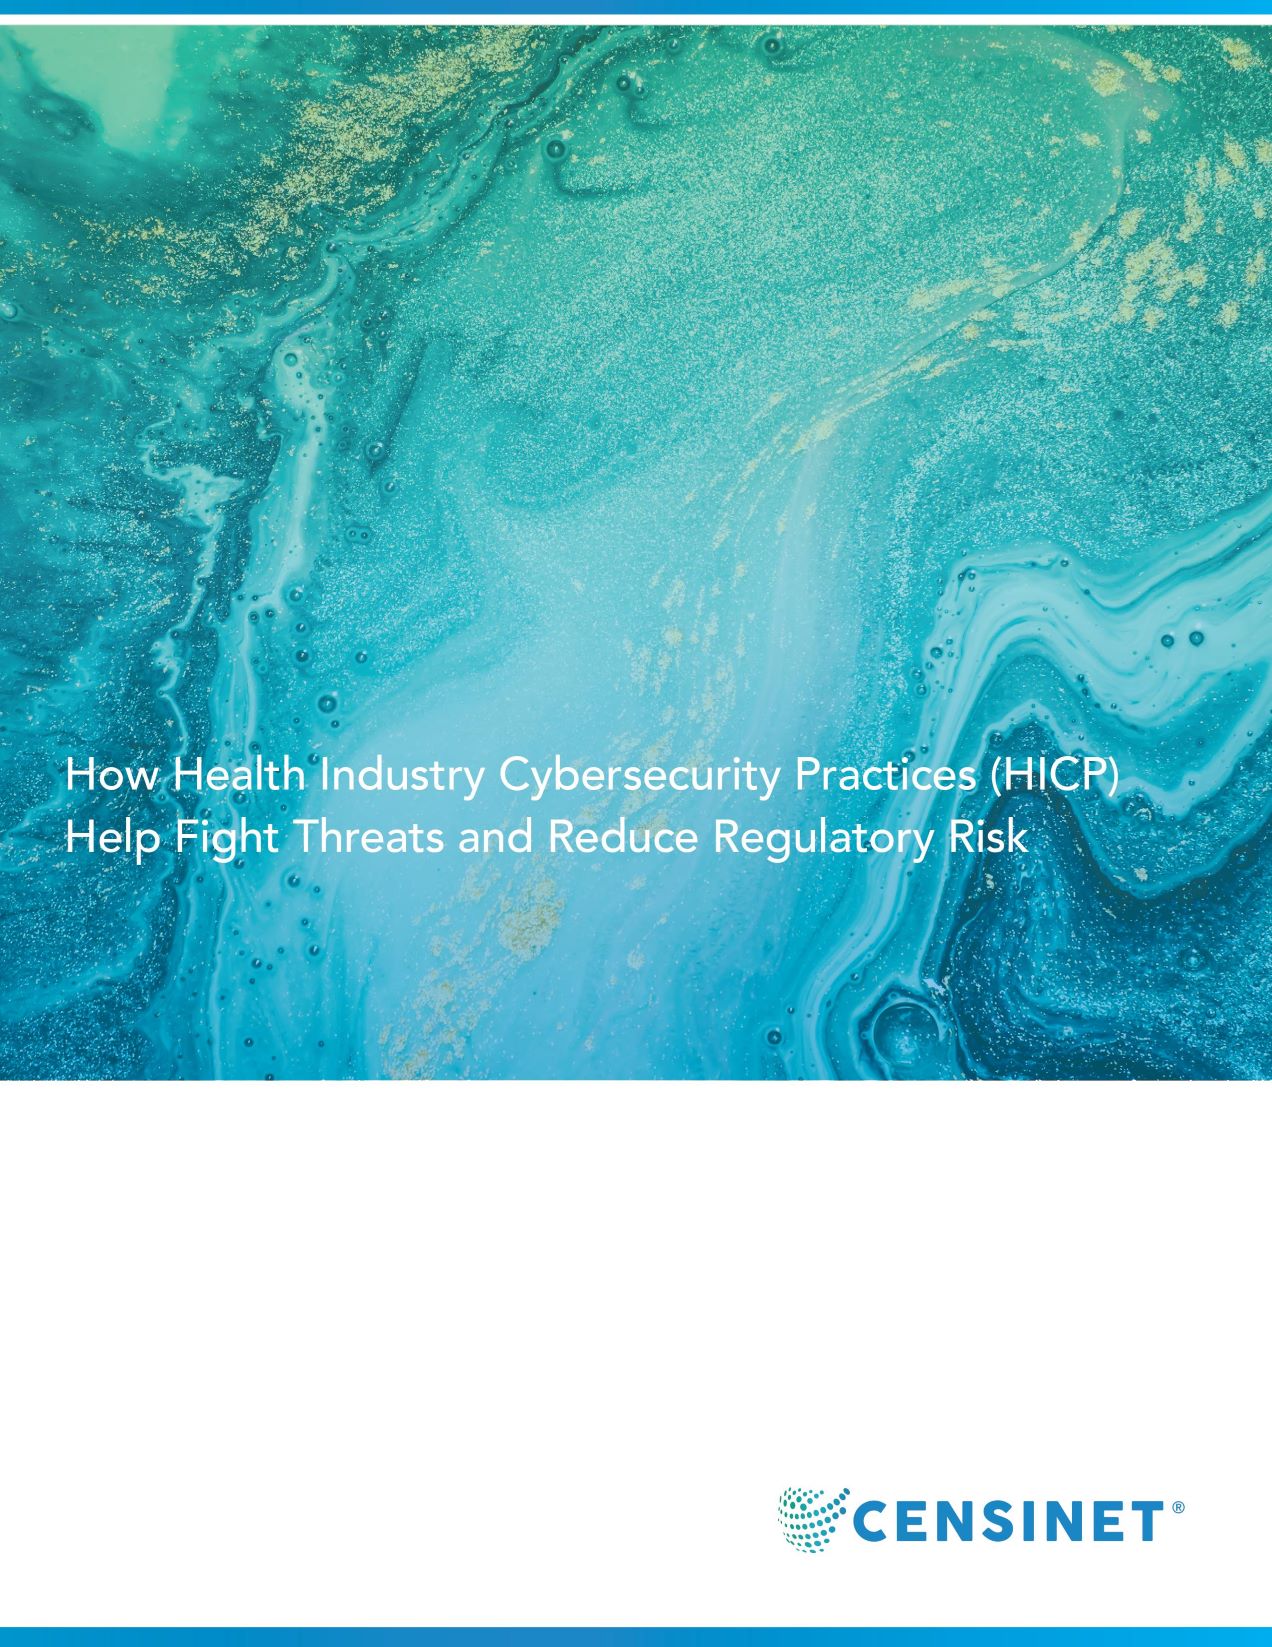 How Health Industry Cybersecurity Practices (HICP) Help Fight Threats and Reduce Regulatory Risk